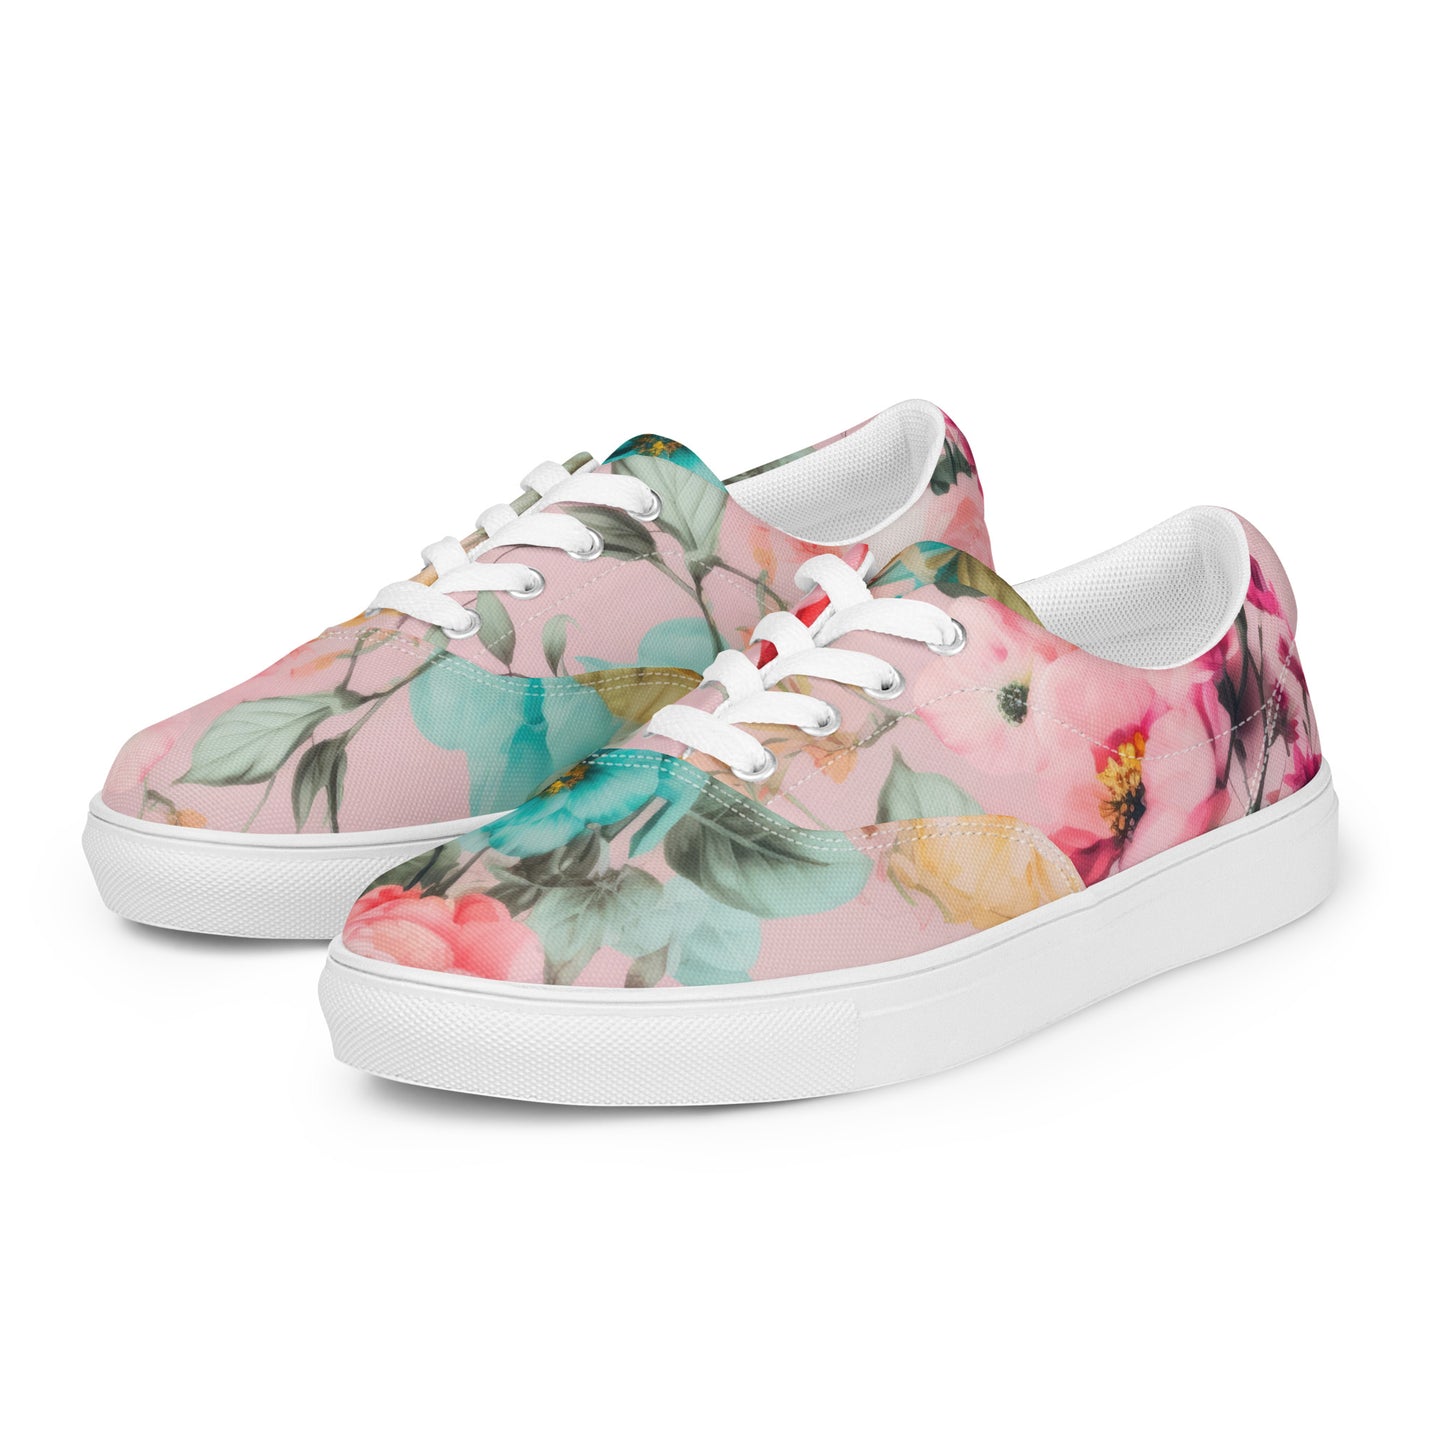 Women’s Lace-up Canvas Shoes: Spring Queen Pink Collection in Sophia